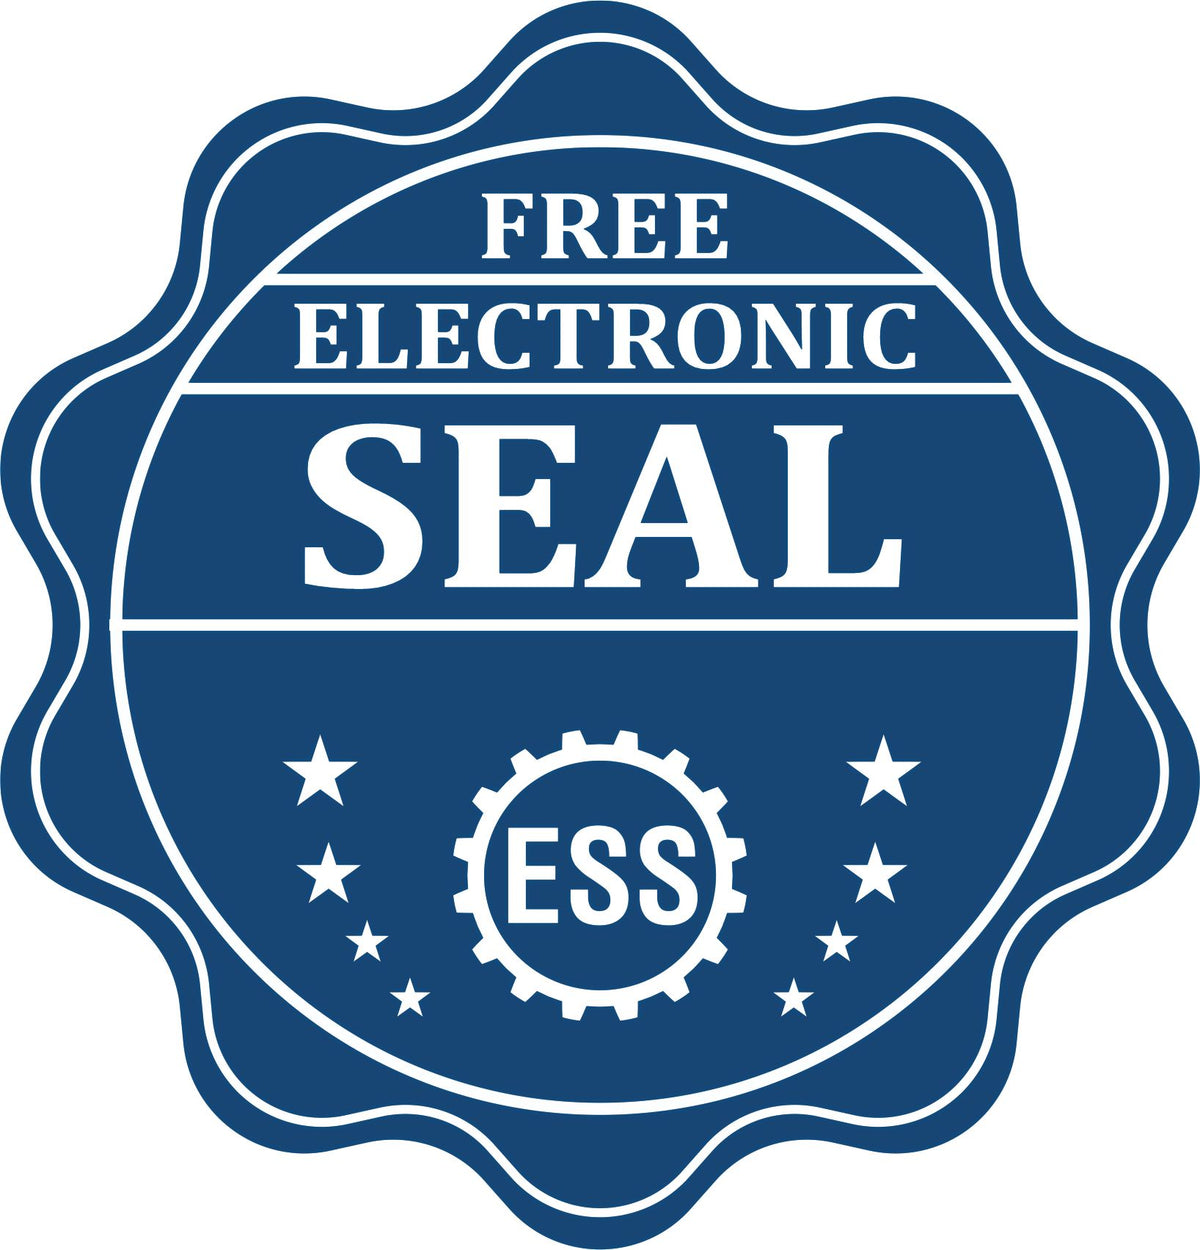 A badge showing a free electronic seal for the Soft Kansas Professional Geologist Seal with stars and the ESS gear on the emblem.